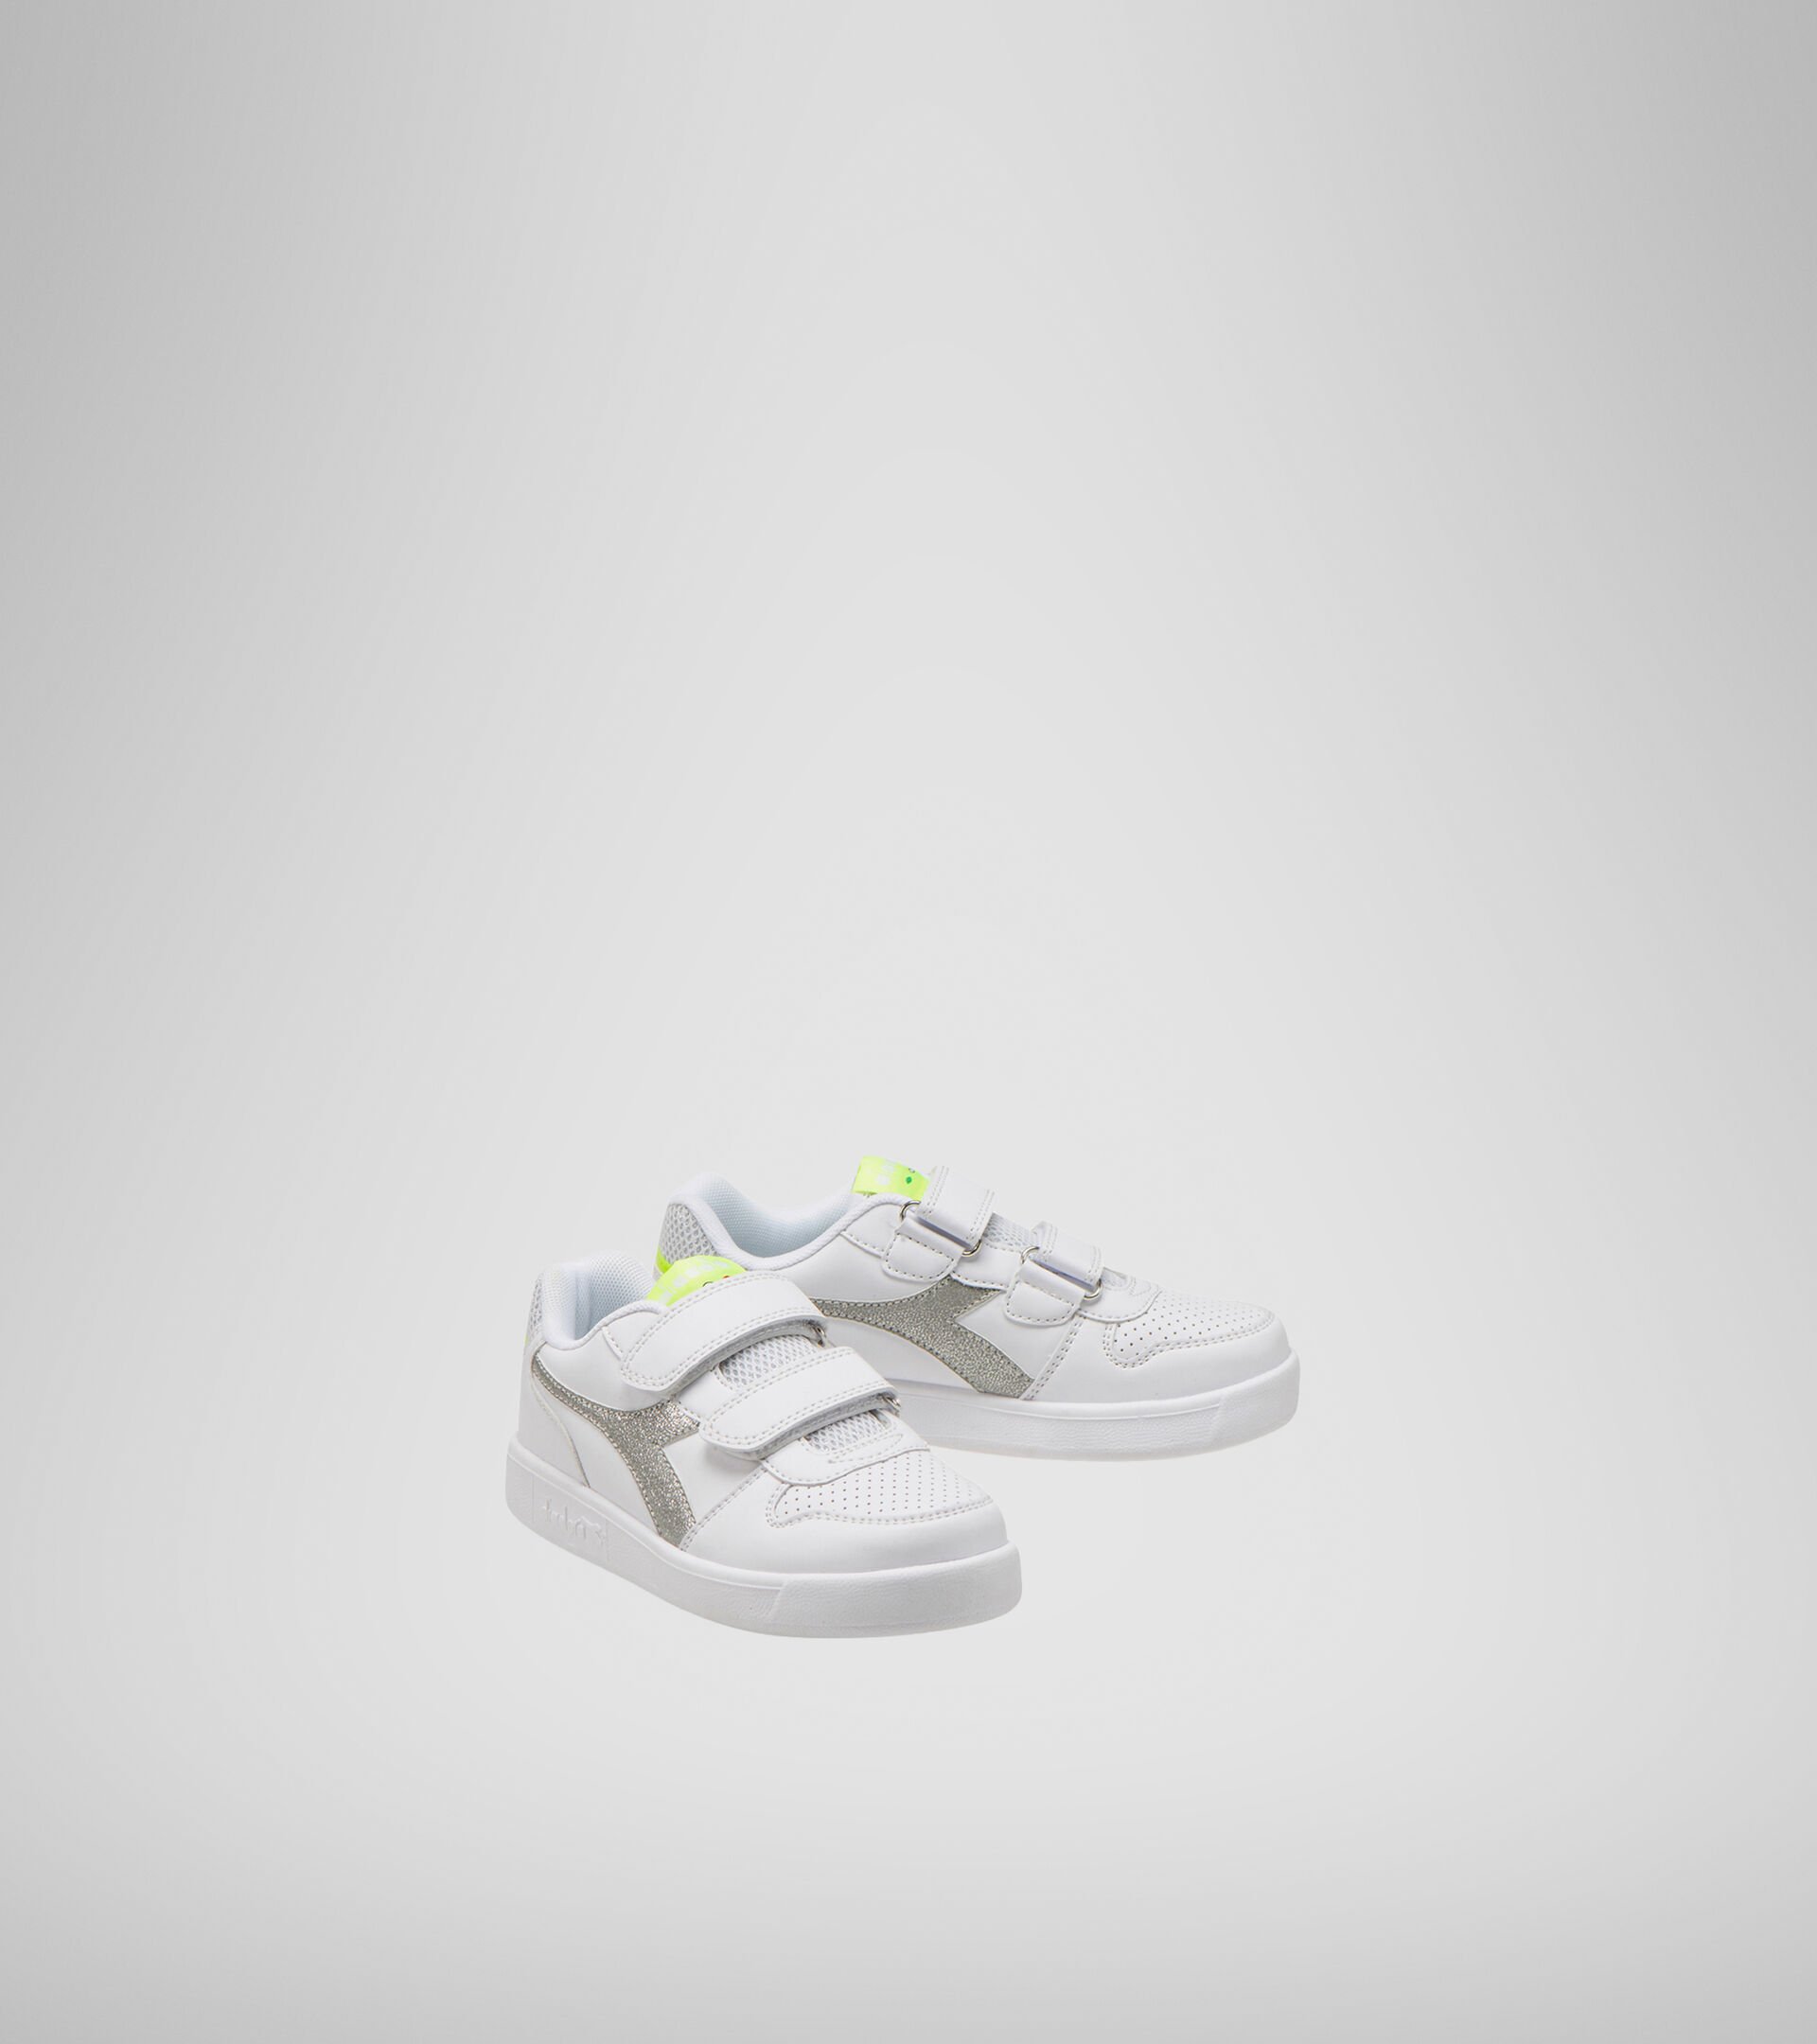 Sports shoes - Kids 4-8 years PLAYGROUND PS GIRL WHITE/YELLOW FLUO. - Diadora